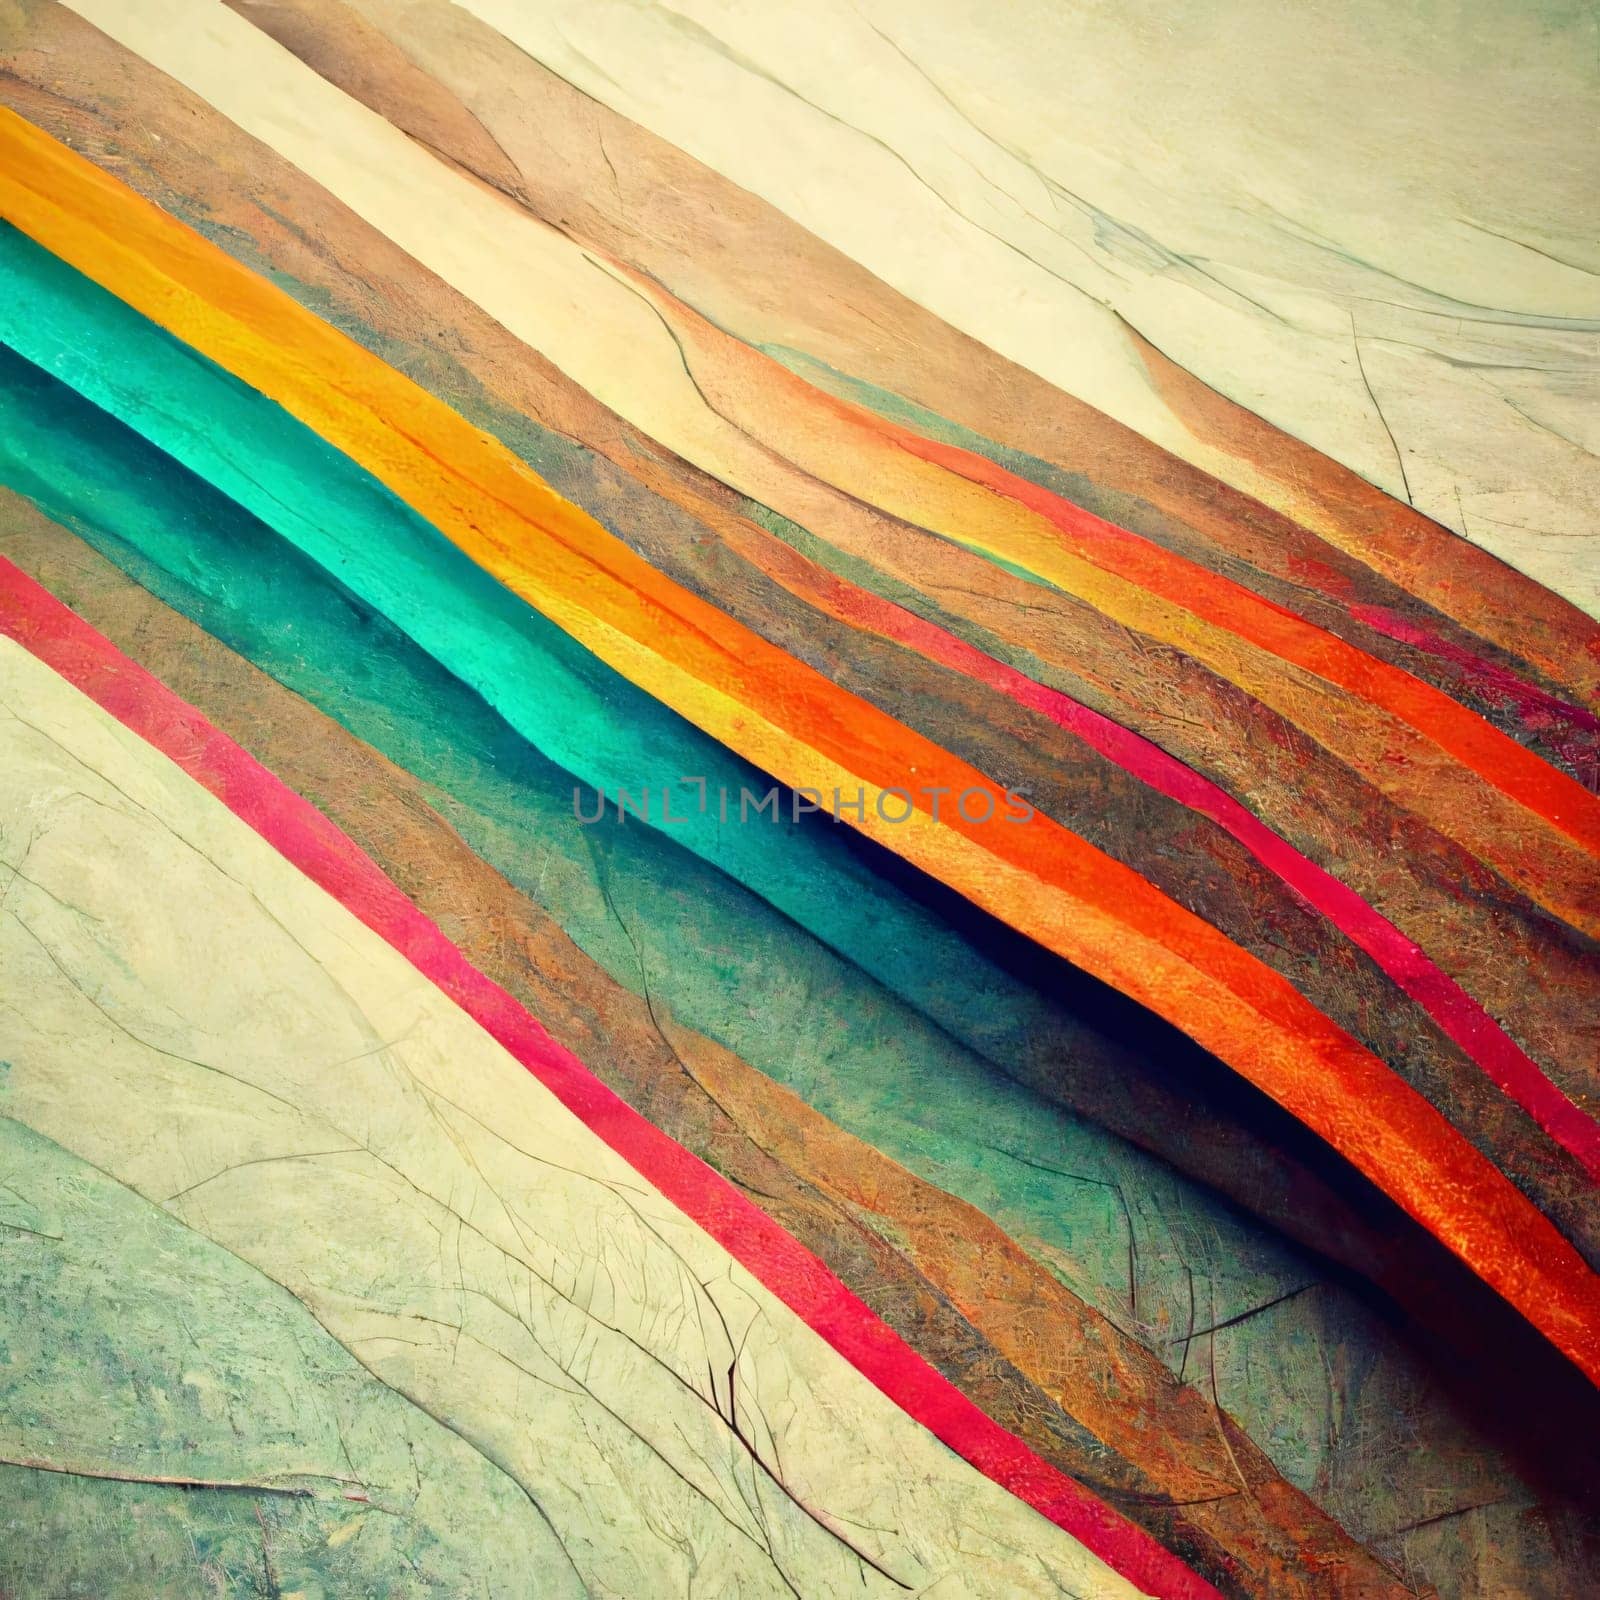 Abstract background design: abstract background with colorful stripes and lines in grunge paper style